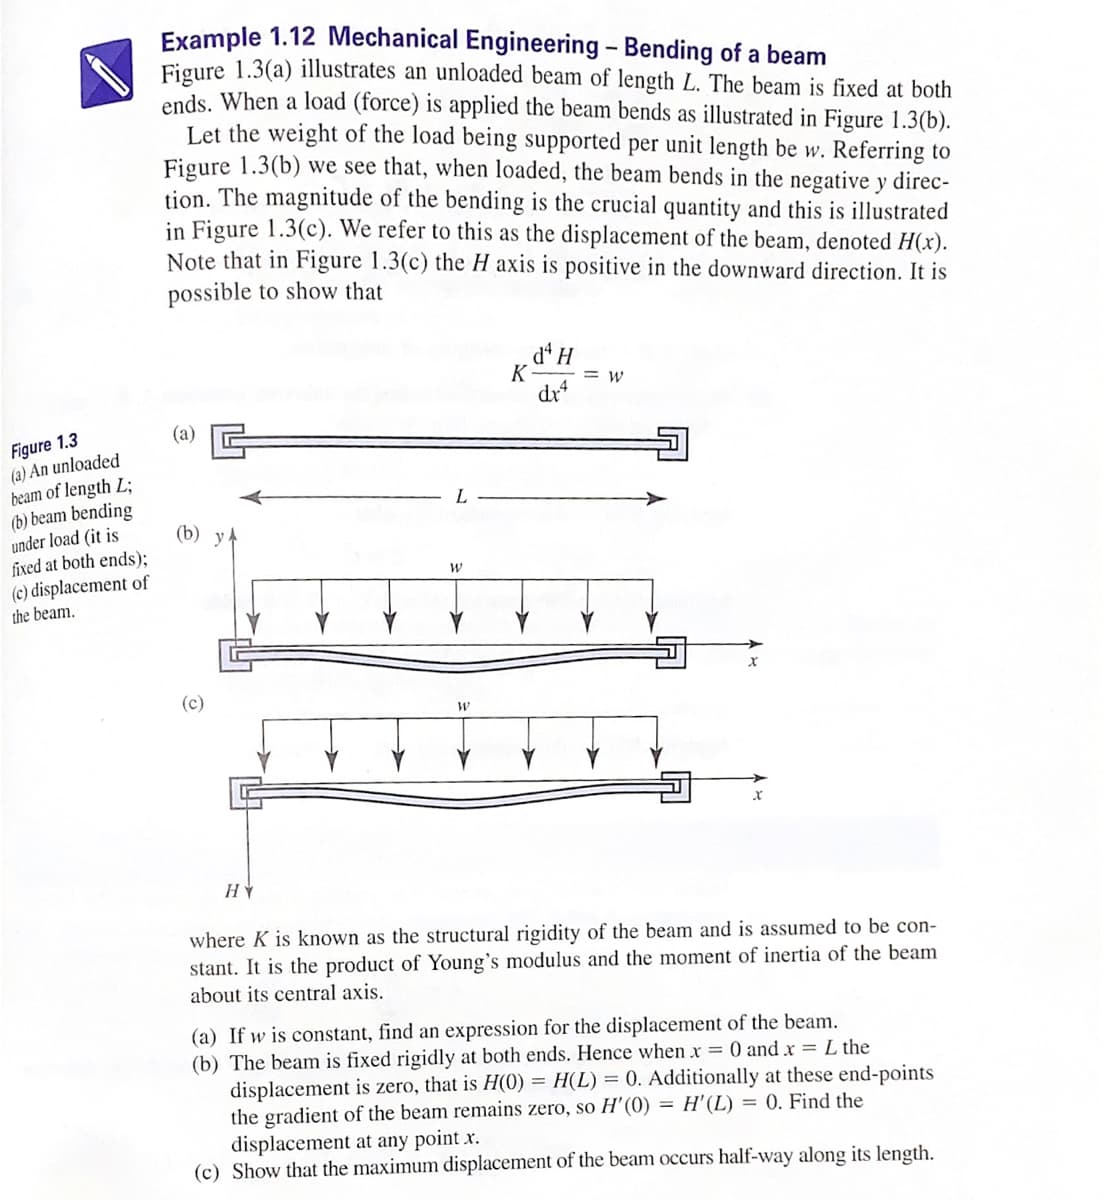 Example 1.12 Mechanical Engineering - Bending of a beam
Figure 1.3(a) illustrates an unloaded beam of length L. The beam is fixed at both
ends. When a load (force) is applied the beam bends as illustrated in Figure 1.3(b).
Let the weight of the load being supported per unit length be w. Referring to
Figure 1.3(b) we see that, when loaded, the beam bends in the negative y direc-
tion. The magnitude of the bending is the crucial quantity and this is illustrated
in Figure 1.3(c). We refer to this as the displacement of the beam, denoted H(x).
Note that in Figure 1.3(c) the H axis is positive in the downward direction. It is
possible to show that
dª H
K
= w
dr
(а)
Figure 1.3
(a) An unloaded
beam of length L;
(b) beam bending
under load (it is
fixed at both ends);
(c) displacement of
(b)
the beam.
(c)
where K is known as the structural rigidity of the beam and is assumed to be con-
stant. It is the product of Young's modulus and the moment of inertia of the beam
about its central axis.
(a) If w is constant, find an expression for the displacement of the beam.
(b) The beam is fixed rigidly at both ends. Hence when x = 0 and x = L the
displacement is zero, that is H(0) = H(L) = 0. Additionally at these end-points
the gradient of the beam remains zero, so H'(0) = H'(L) = 0. Find the
displacement at any point x.
(c) Show that the maximum displacement of the beam occurs half-way along its length.
